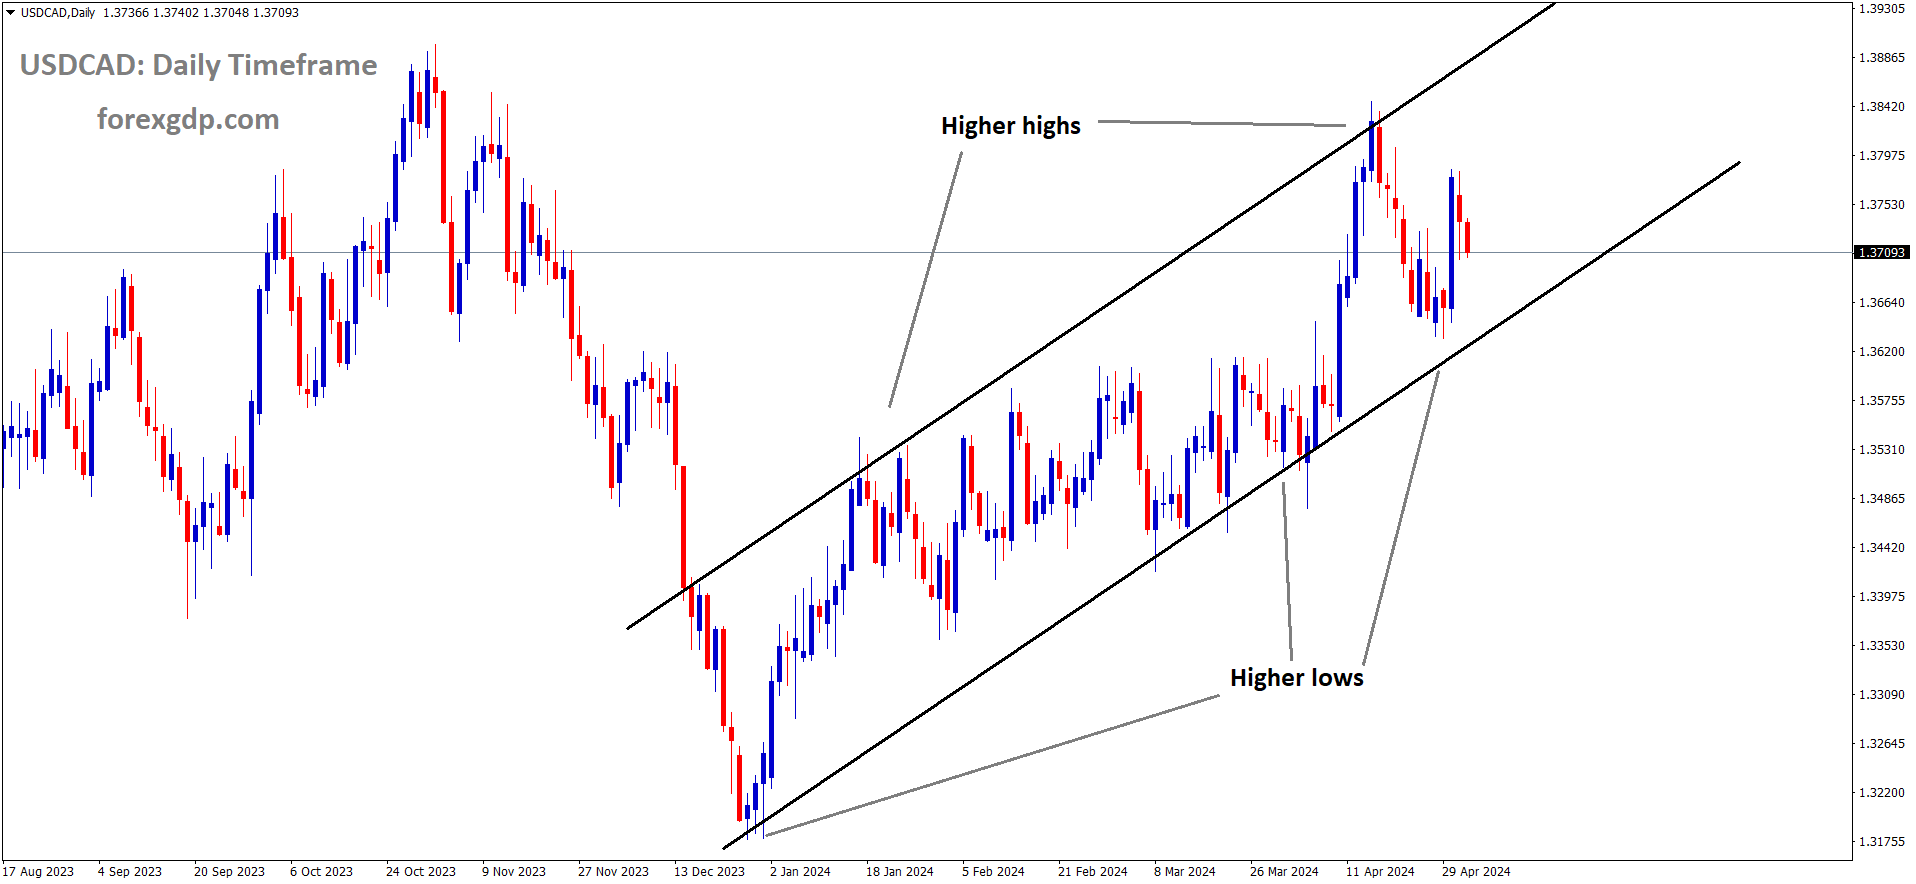 USDCAD is moving in Ascending channel